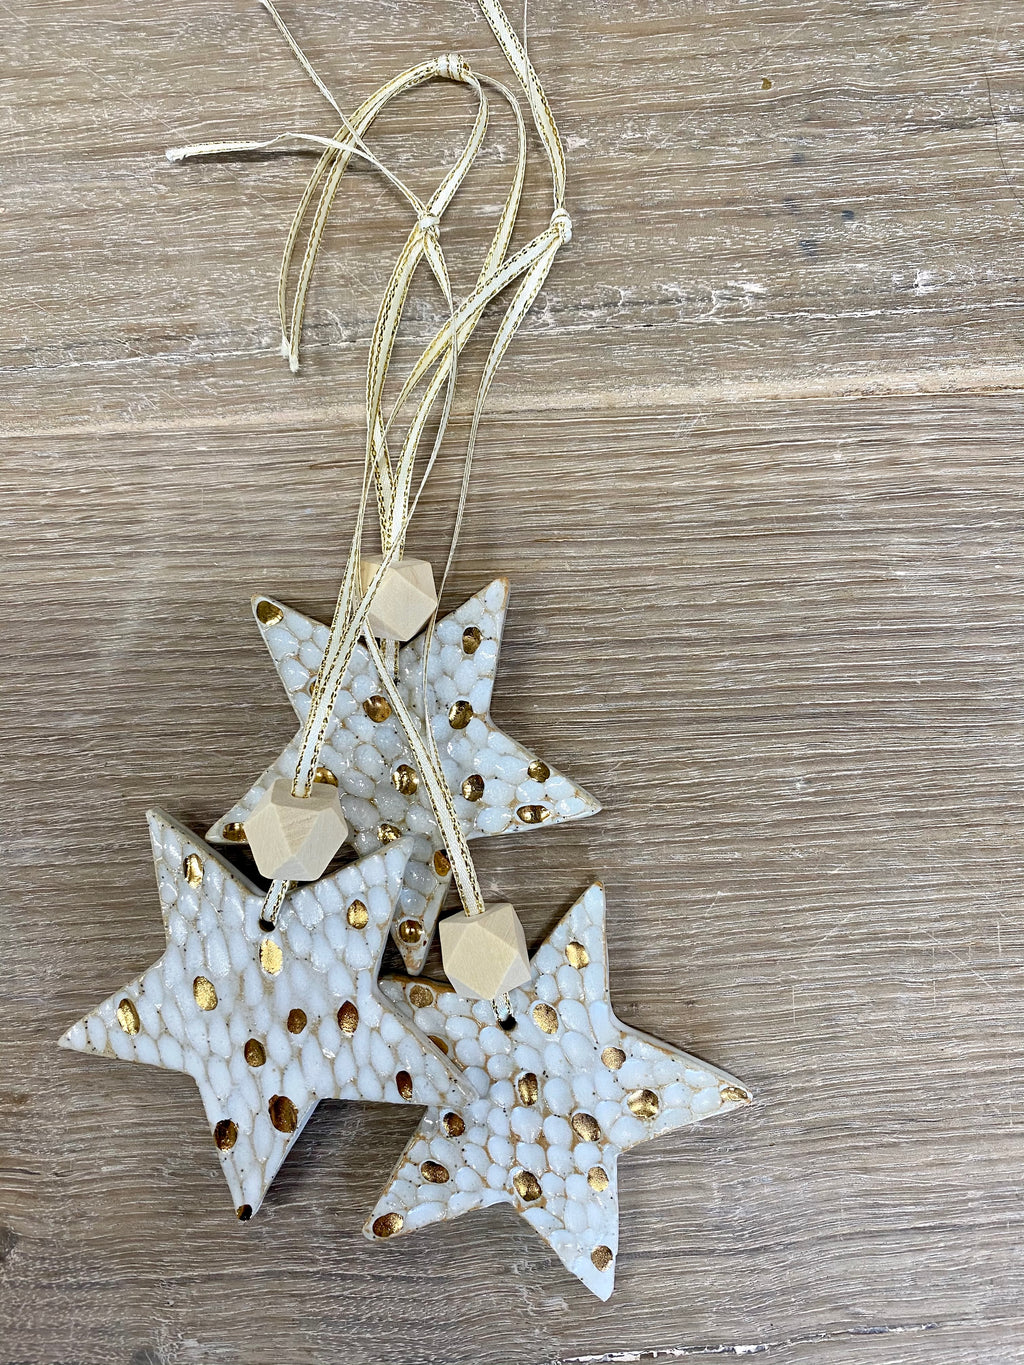 Spotty star with gold decoration